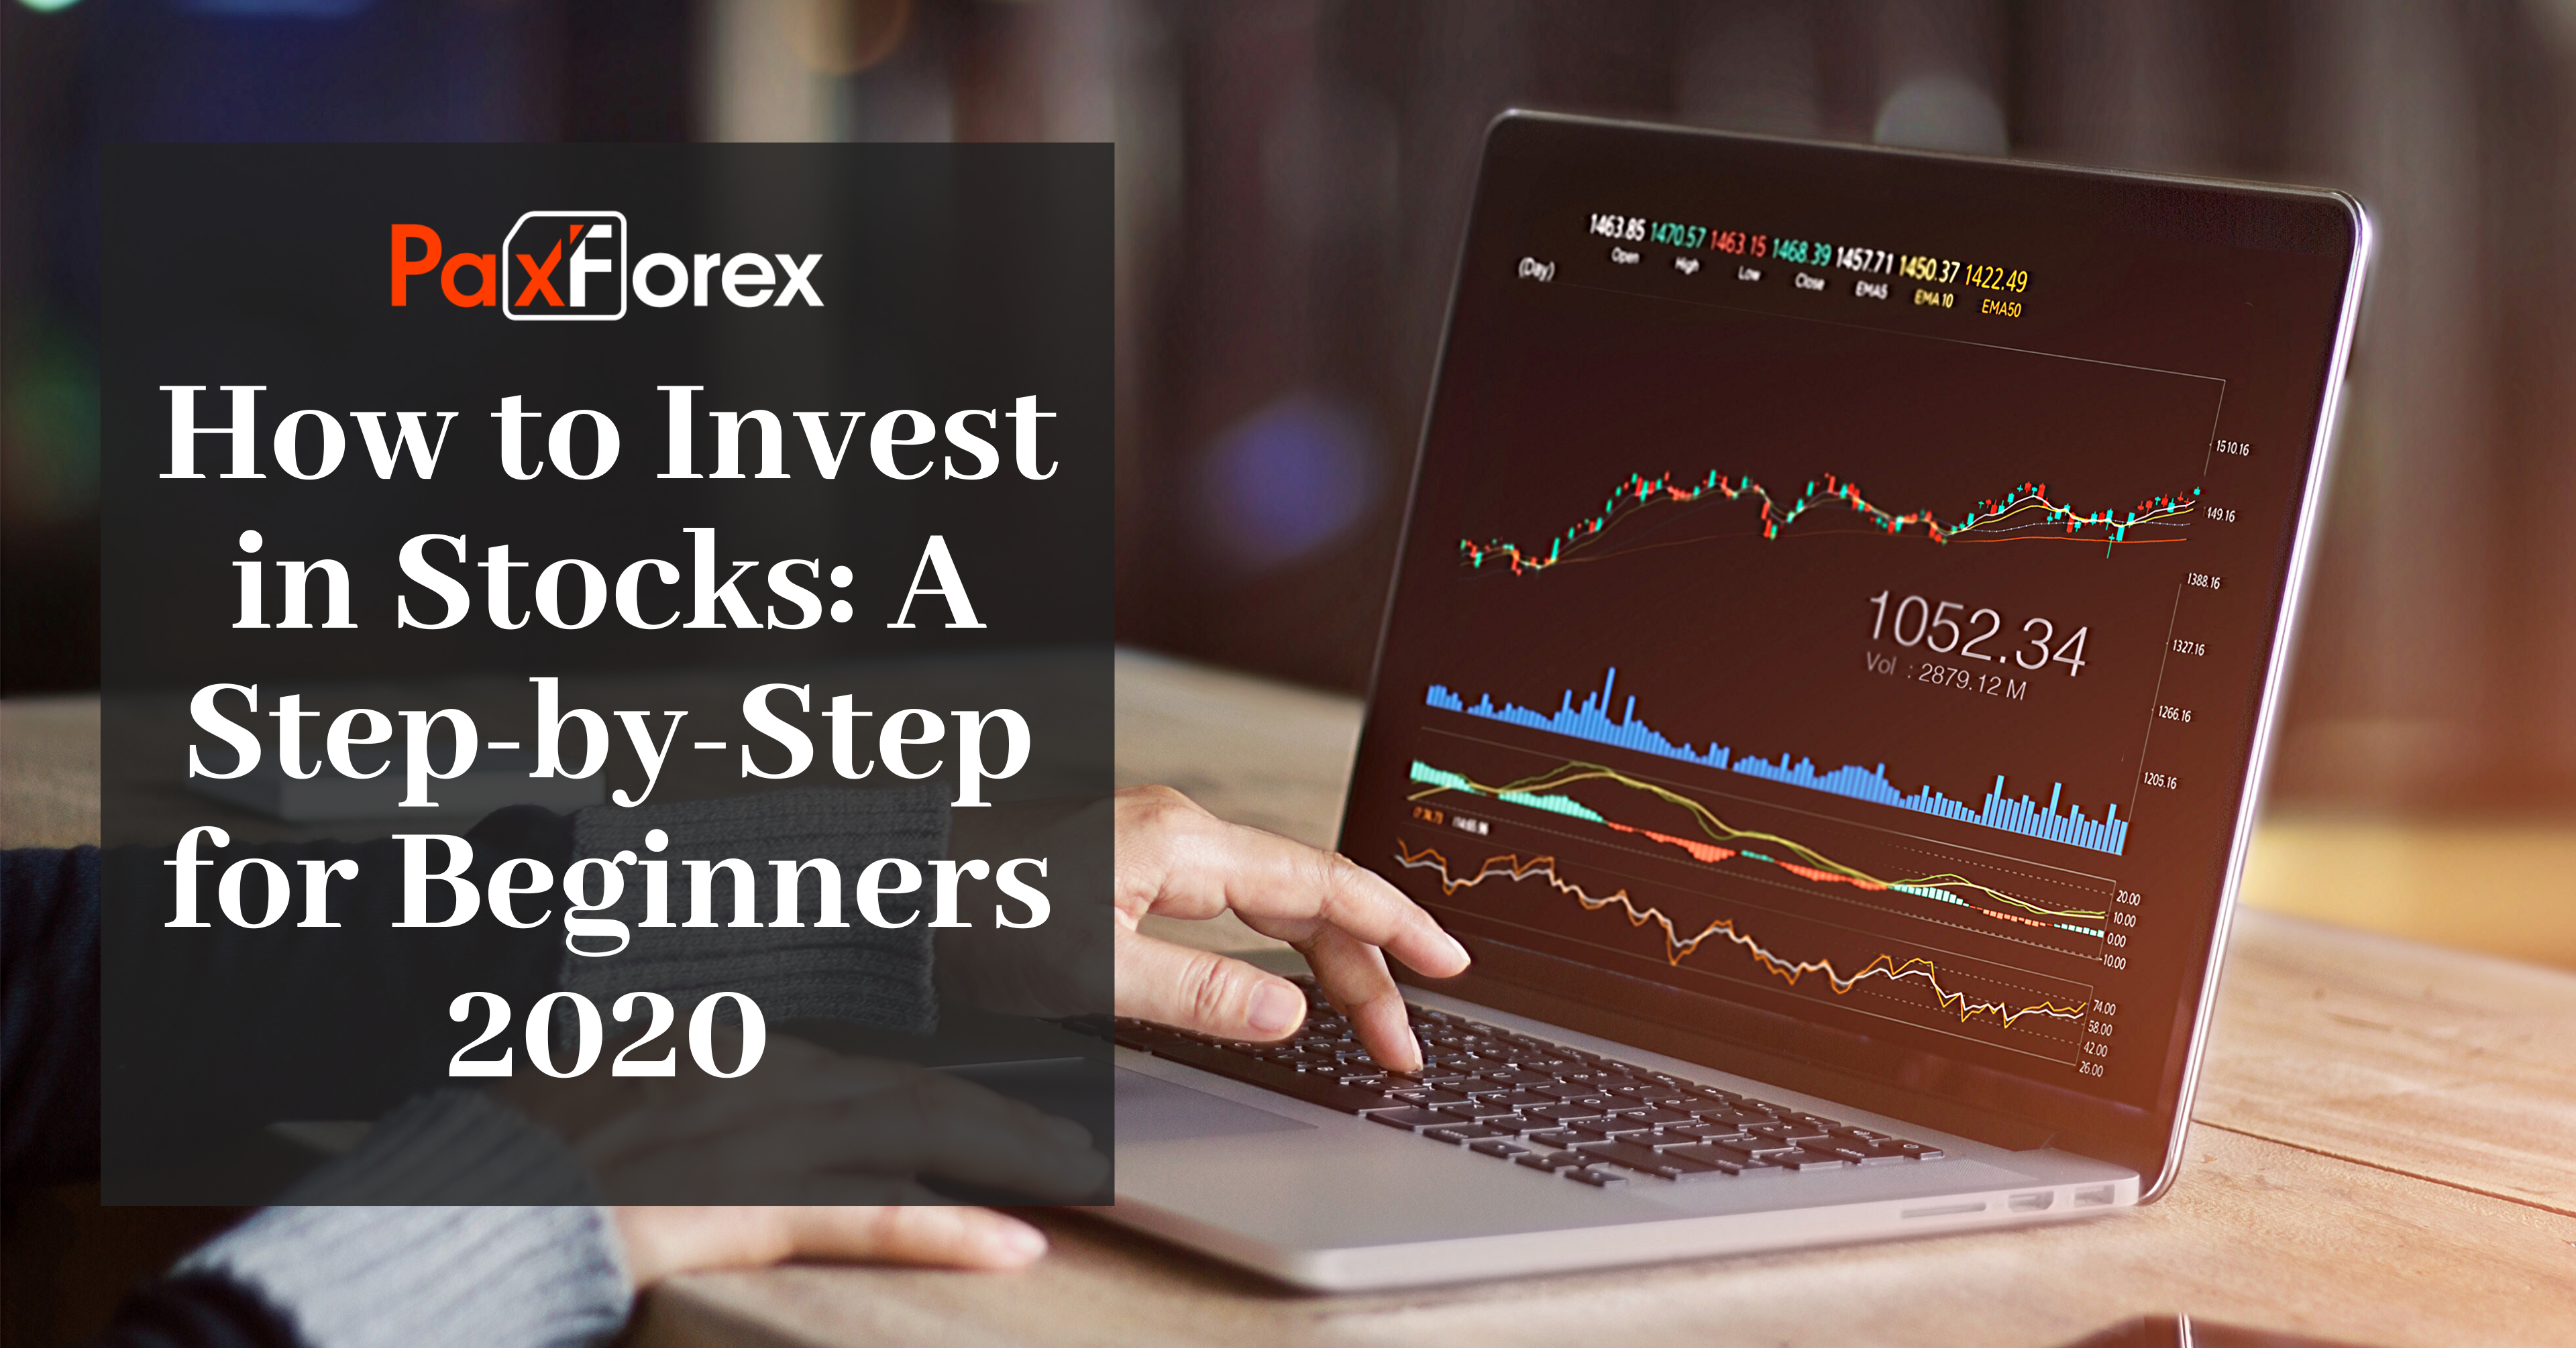 How to Invest in Stocks: A Step-by-Step for Beginners 2020